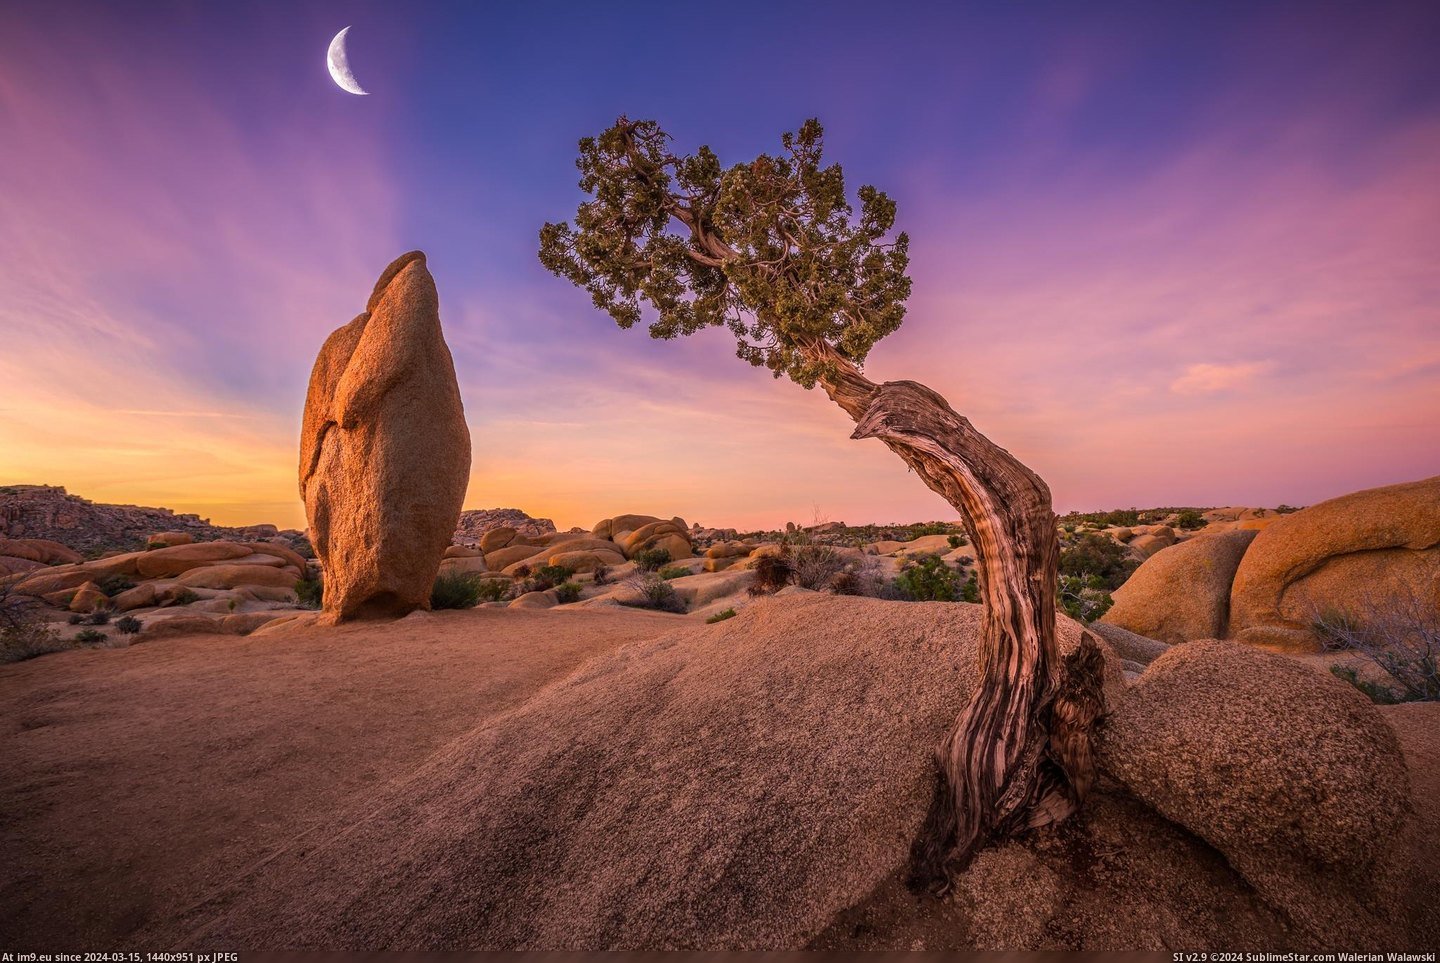 #Park #National #Tree #Rising #Paying #Moon #2048x1365 #Joshua [Earthporn]  Paying Reverence To The Rising Moon, Joshua Tree National Park [2048x1365] Pic. (Obraz z album My r/EARTHPORN favs))